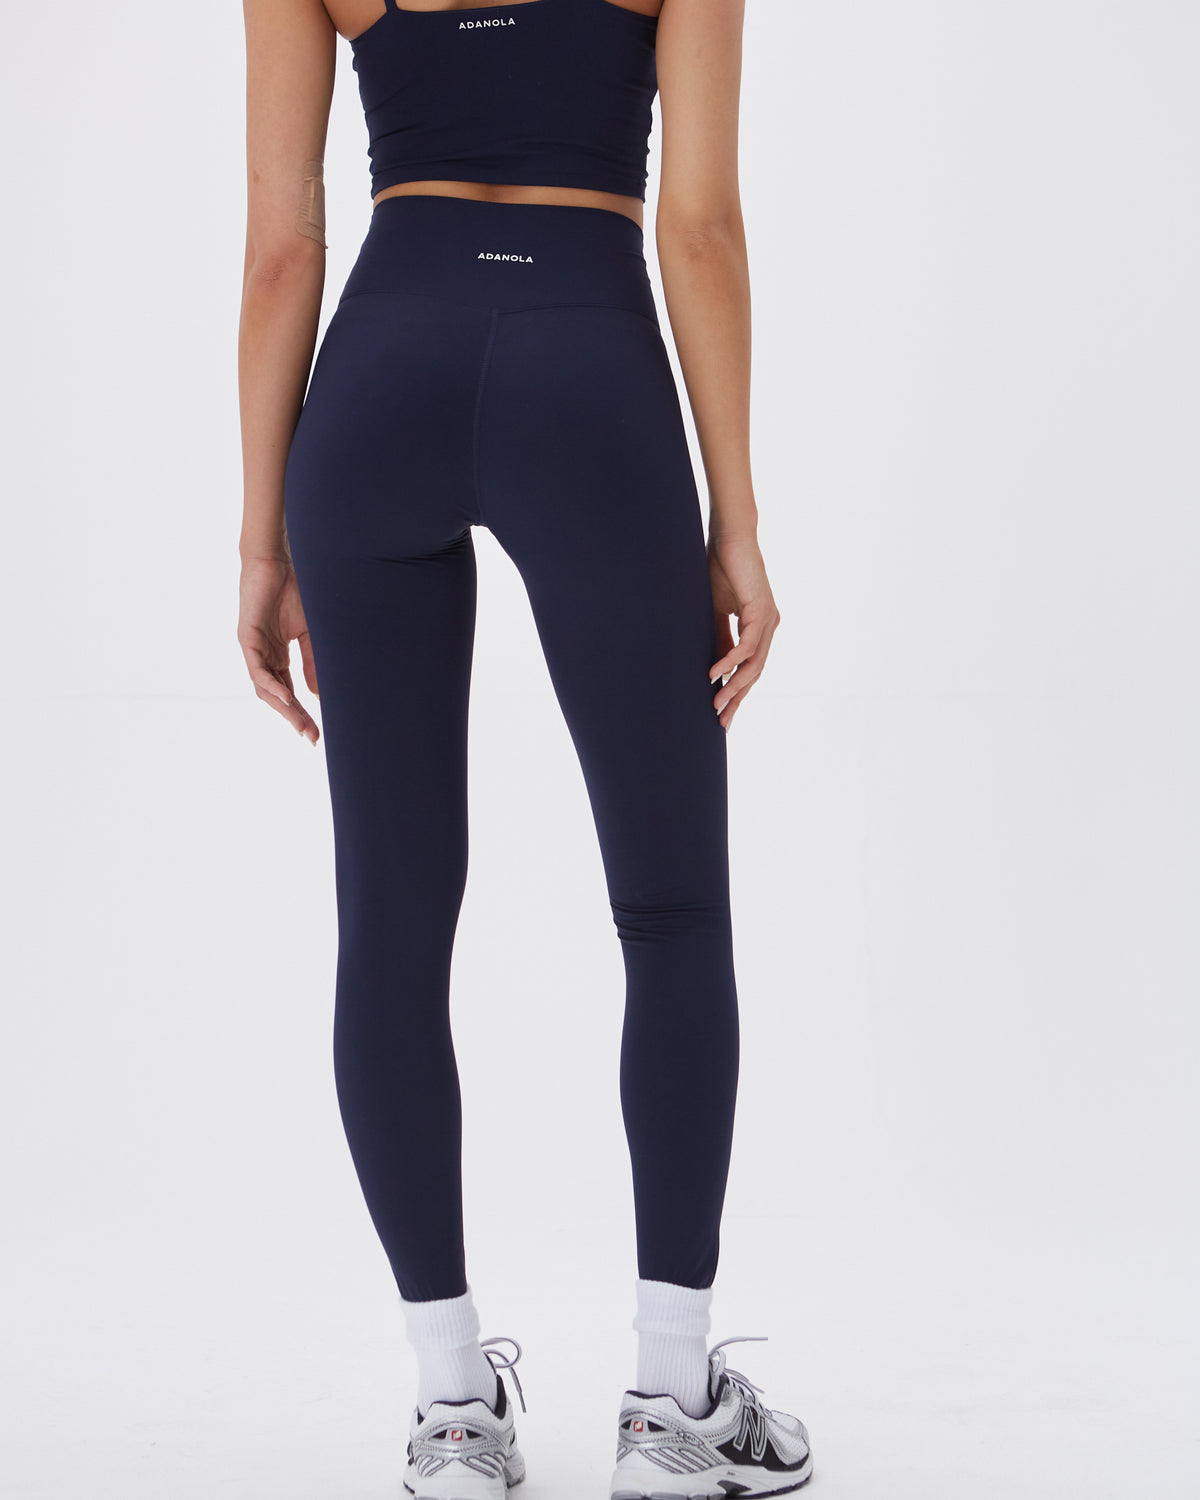 Senita Athletics - The Blue Rosa Amp Leggings + Ava Crop Top in Navy👌👌👌  An A+ outfit on our report card.